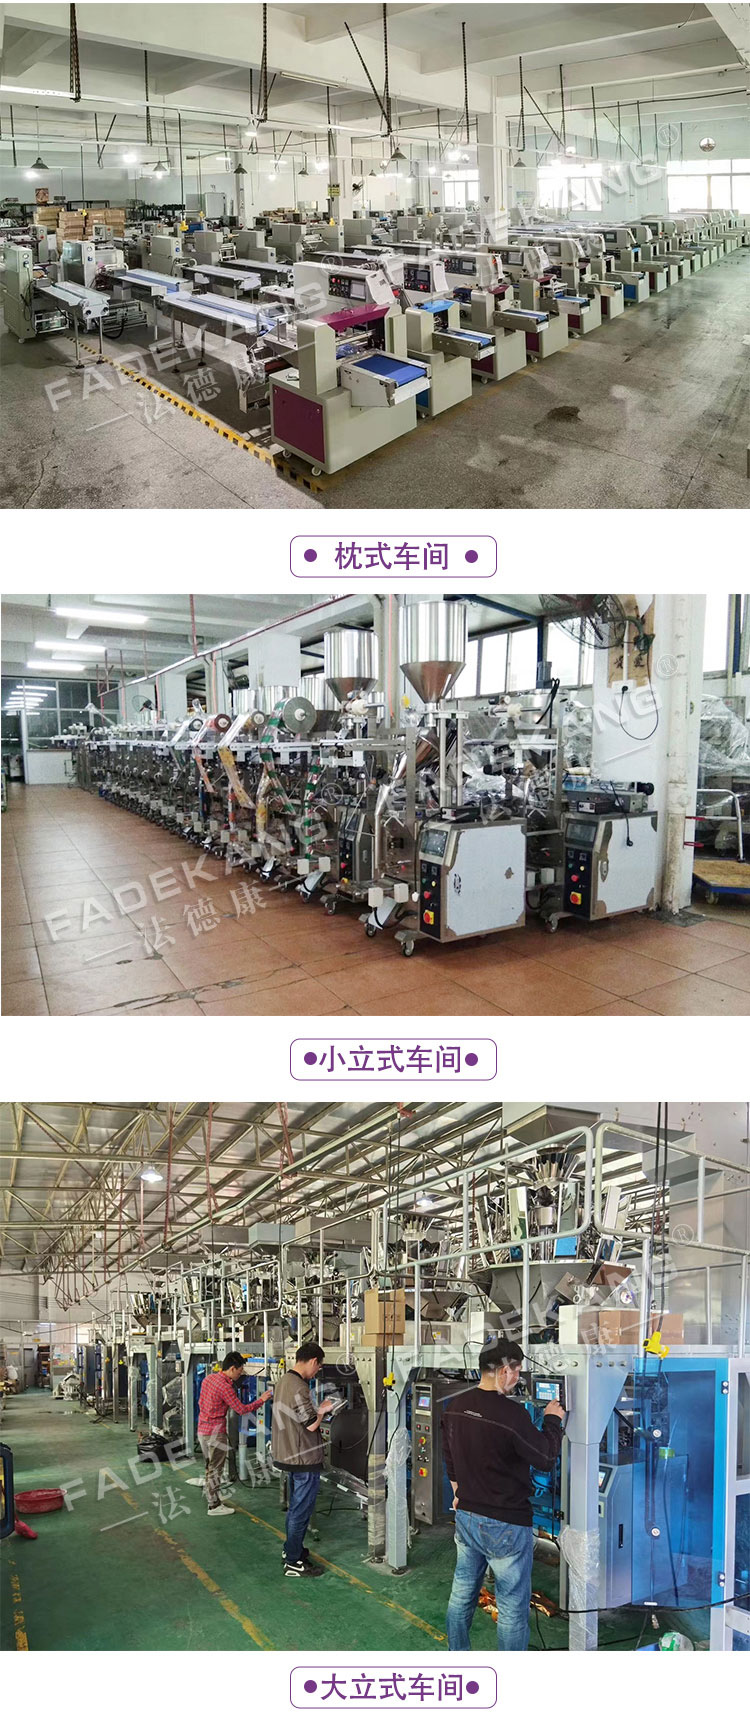 Stainless steel faucet packaging machine, plastic water pipe switch packaging machine, water spray gun automatic bagging machine